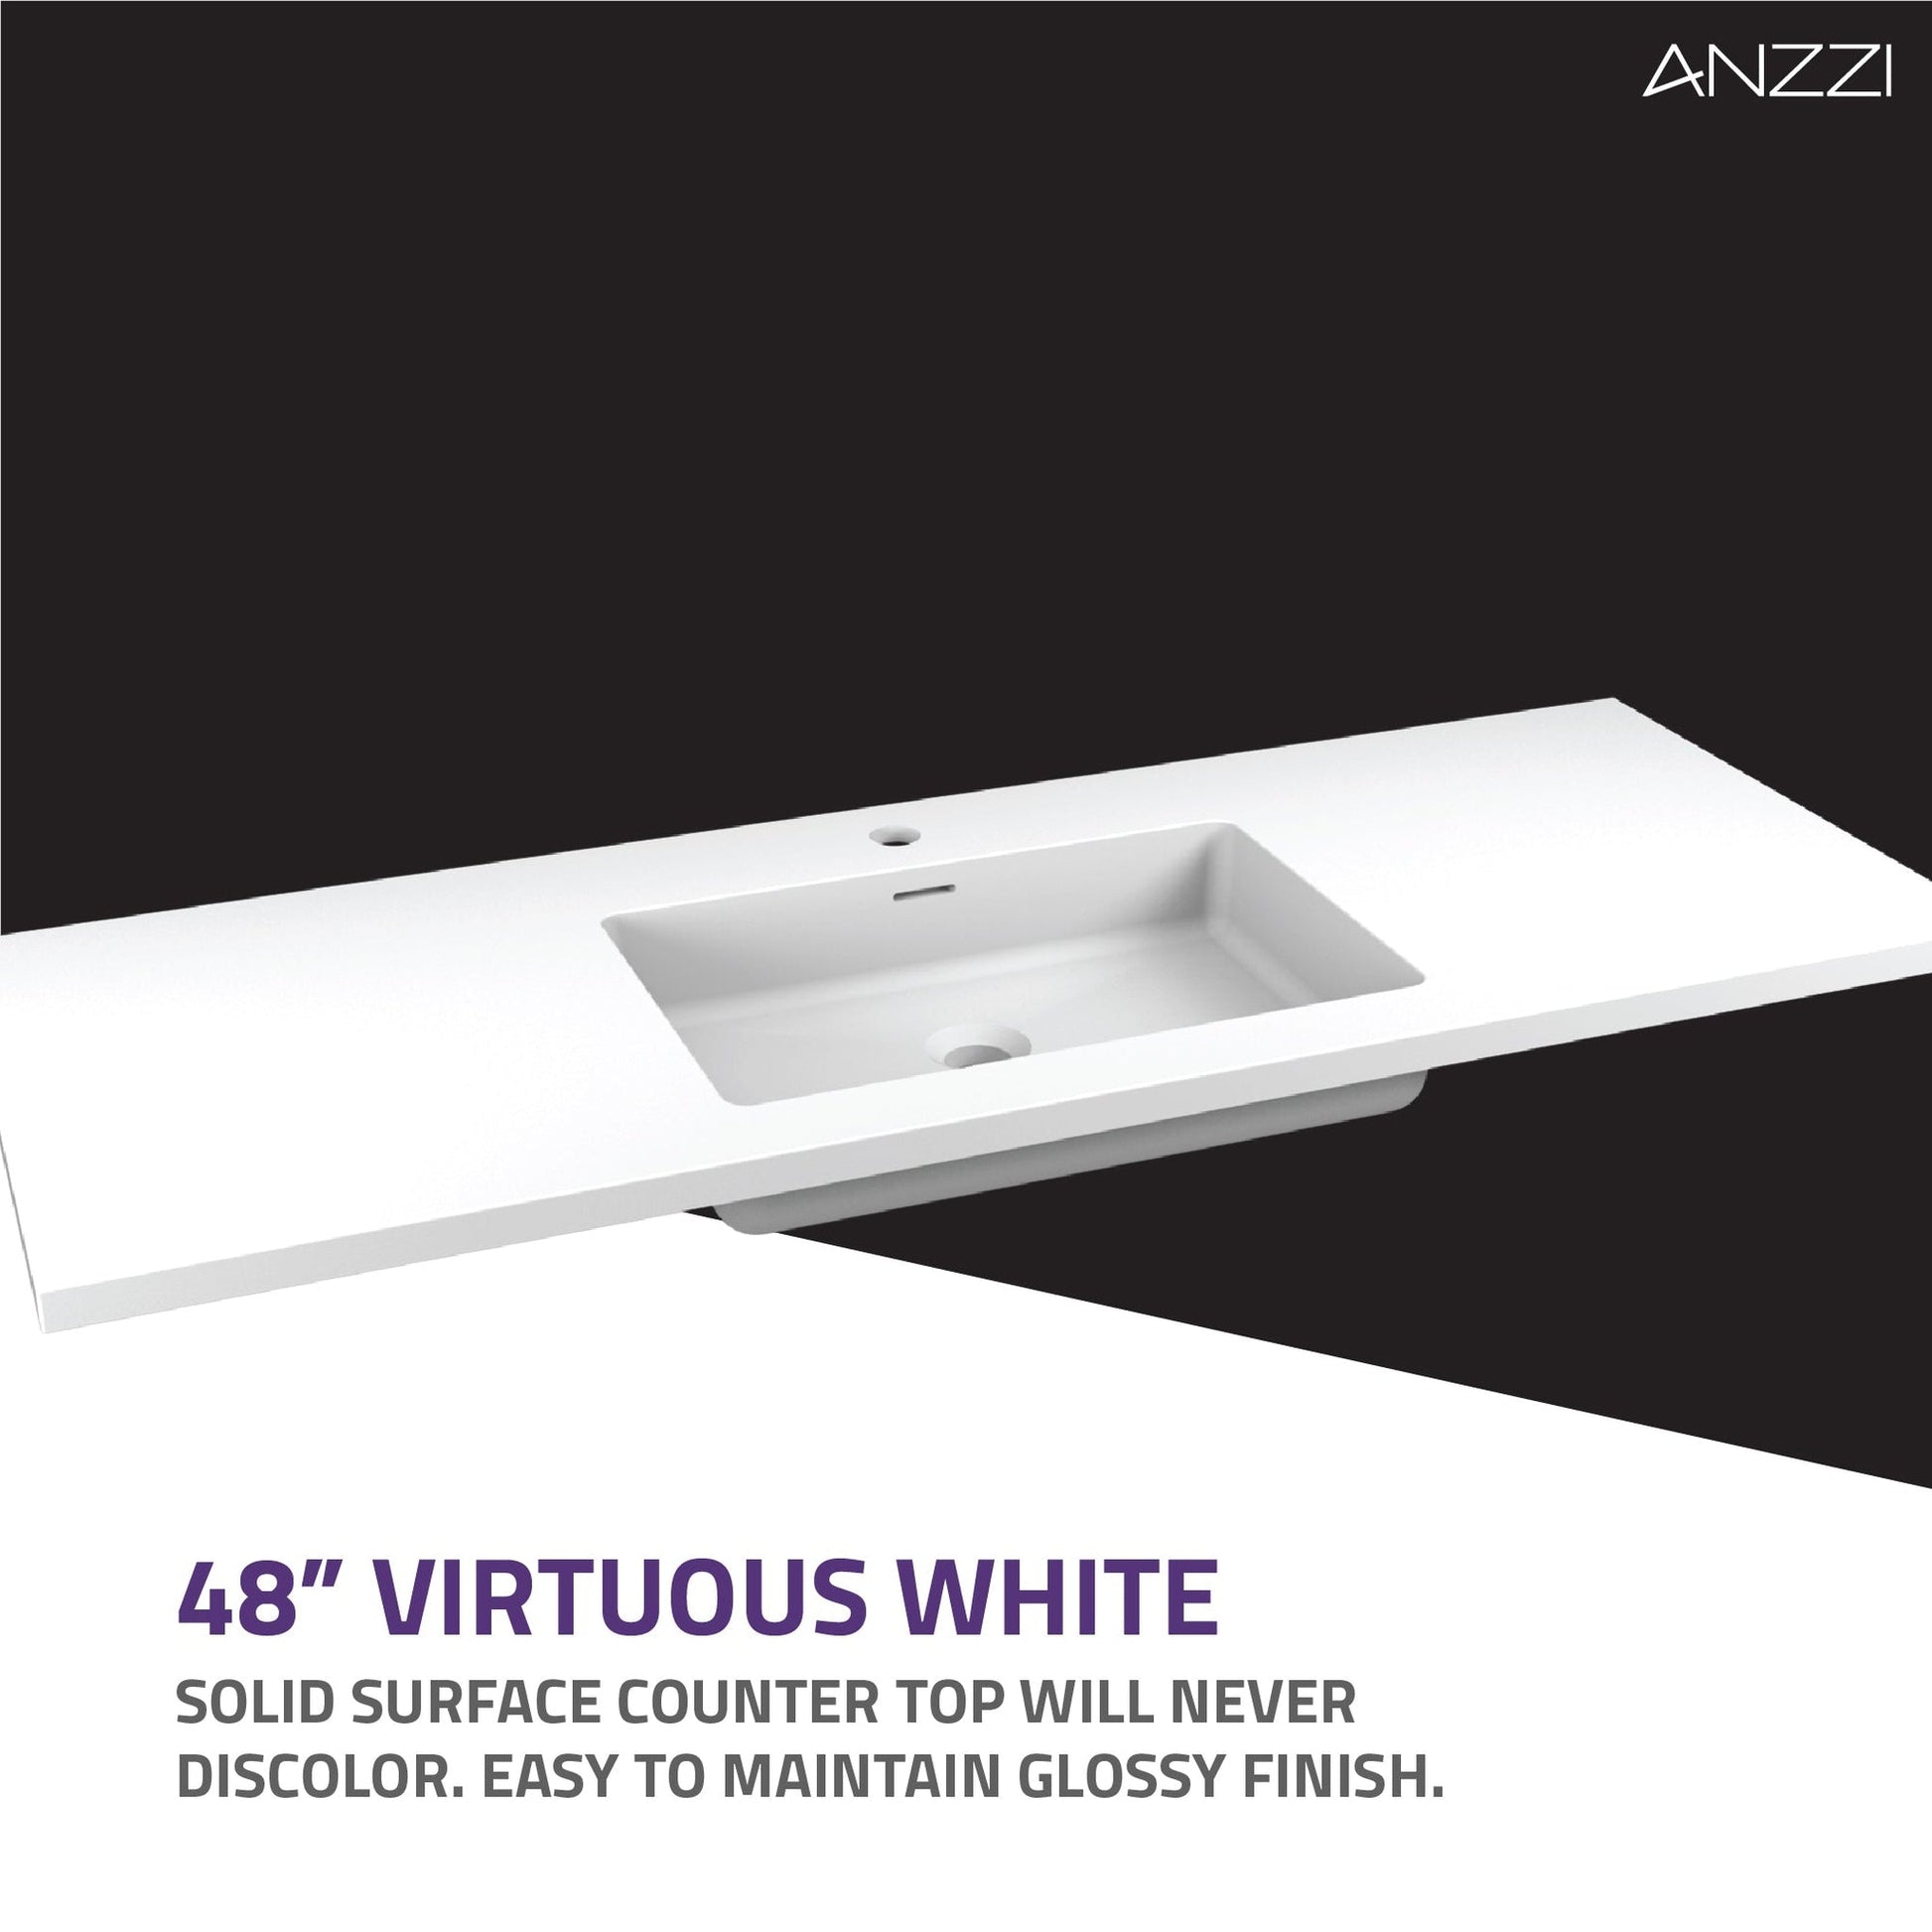 ANZZI Conques 48" x 20" Rich White Solid Wood Bathroom Vanity With Glossy White Countertop With Sink, 39" LED Mirror and Side Cabinet